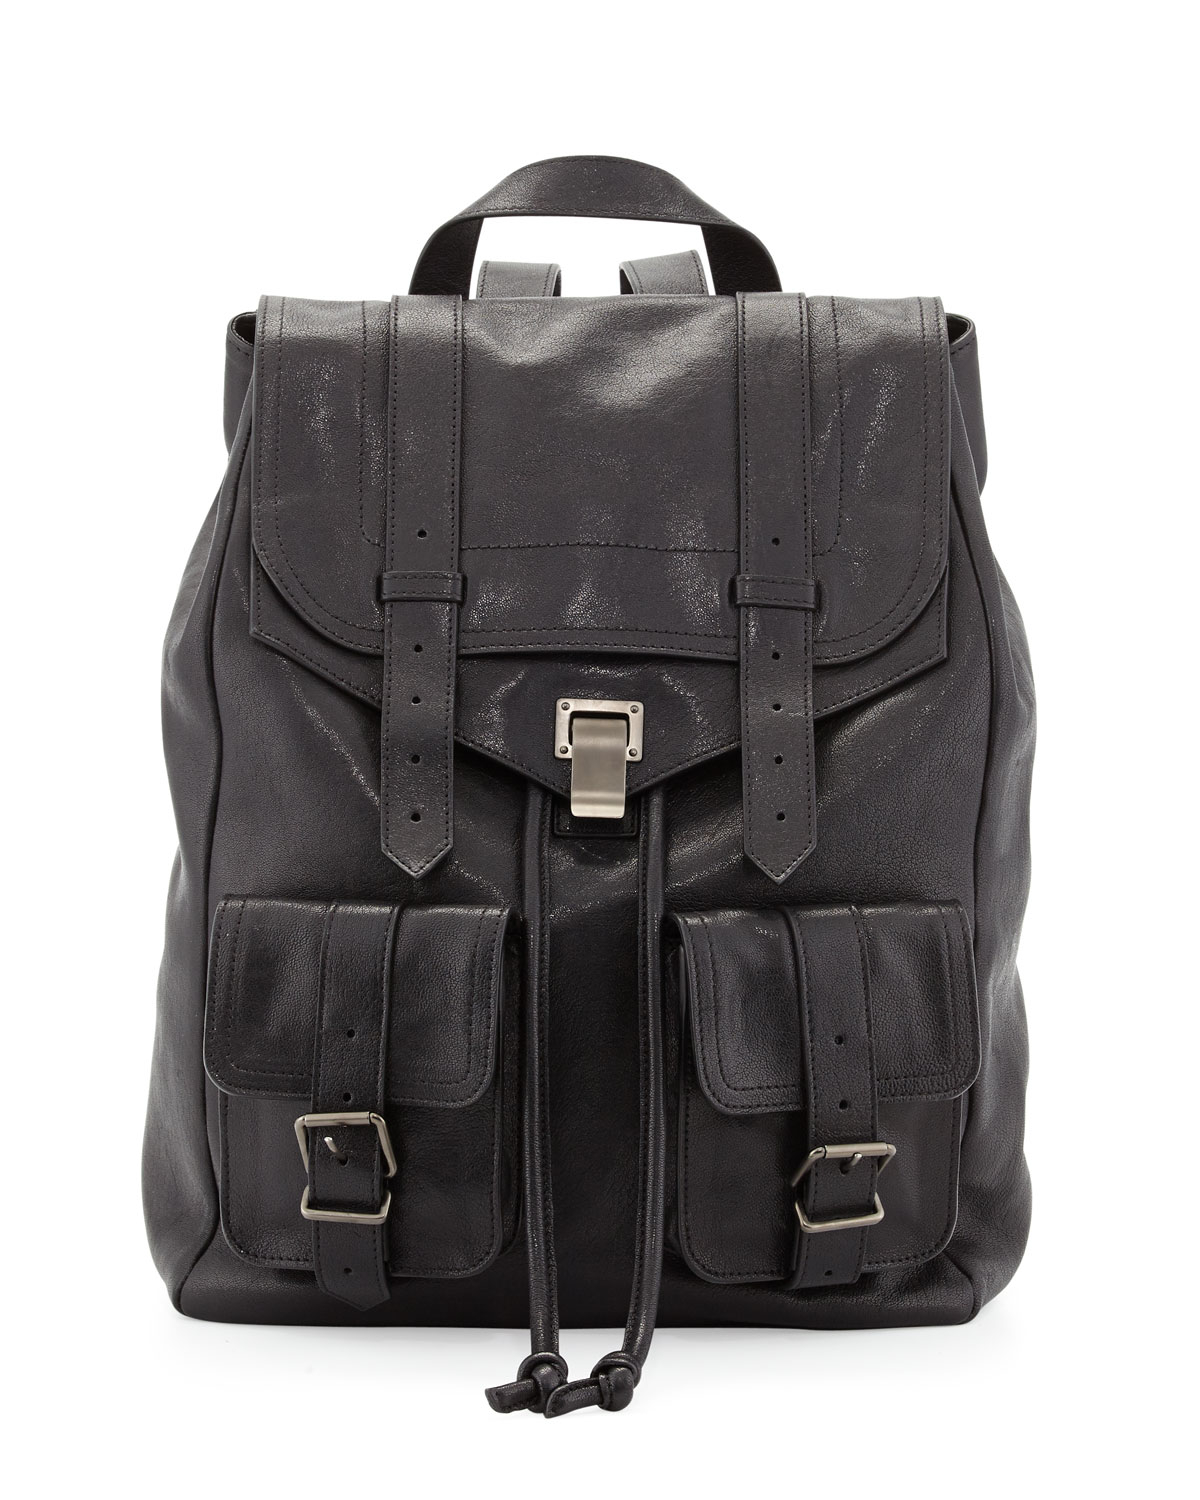 Lyst - Proenza Schouler Ps1 Large Double-pocket Backpack in Black